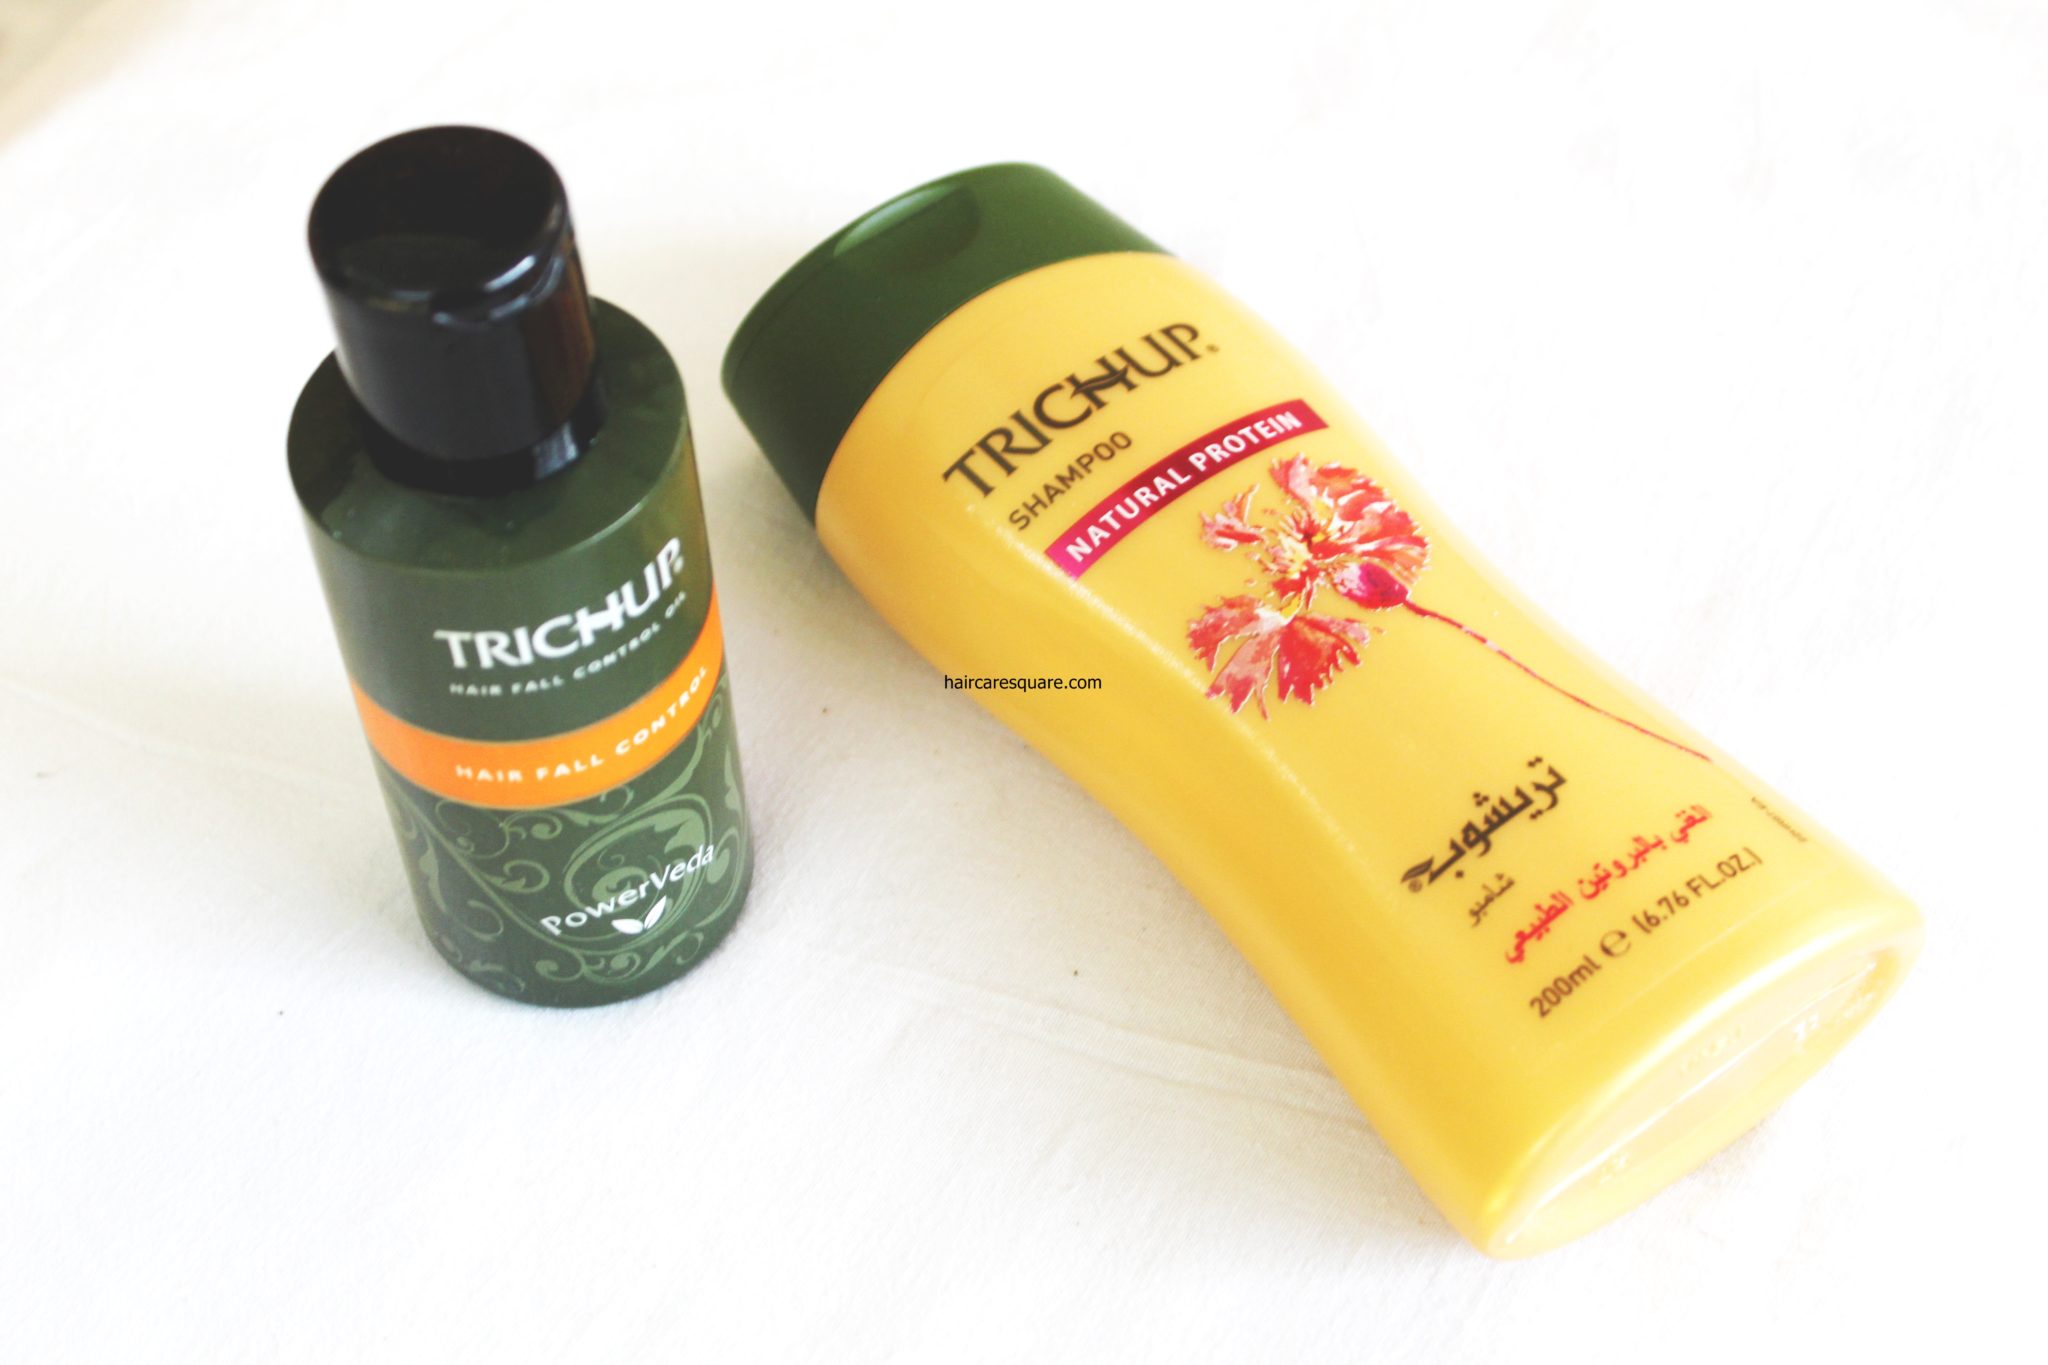 trichup shampoo review